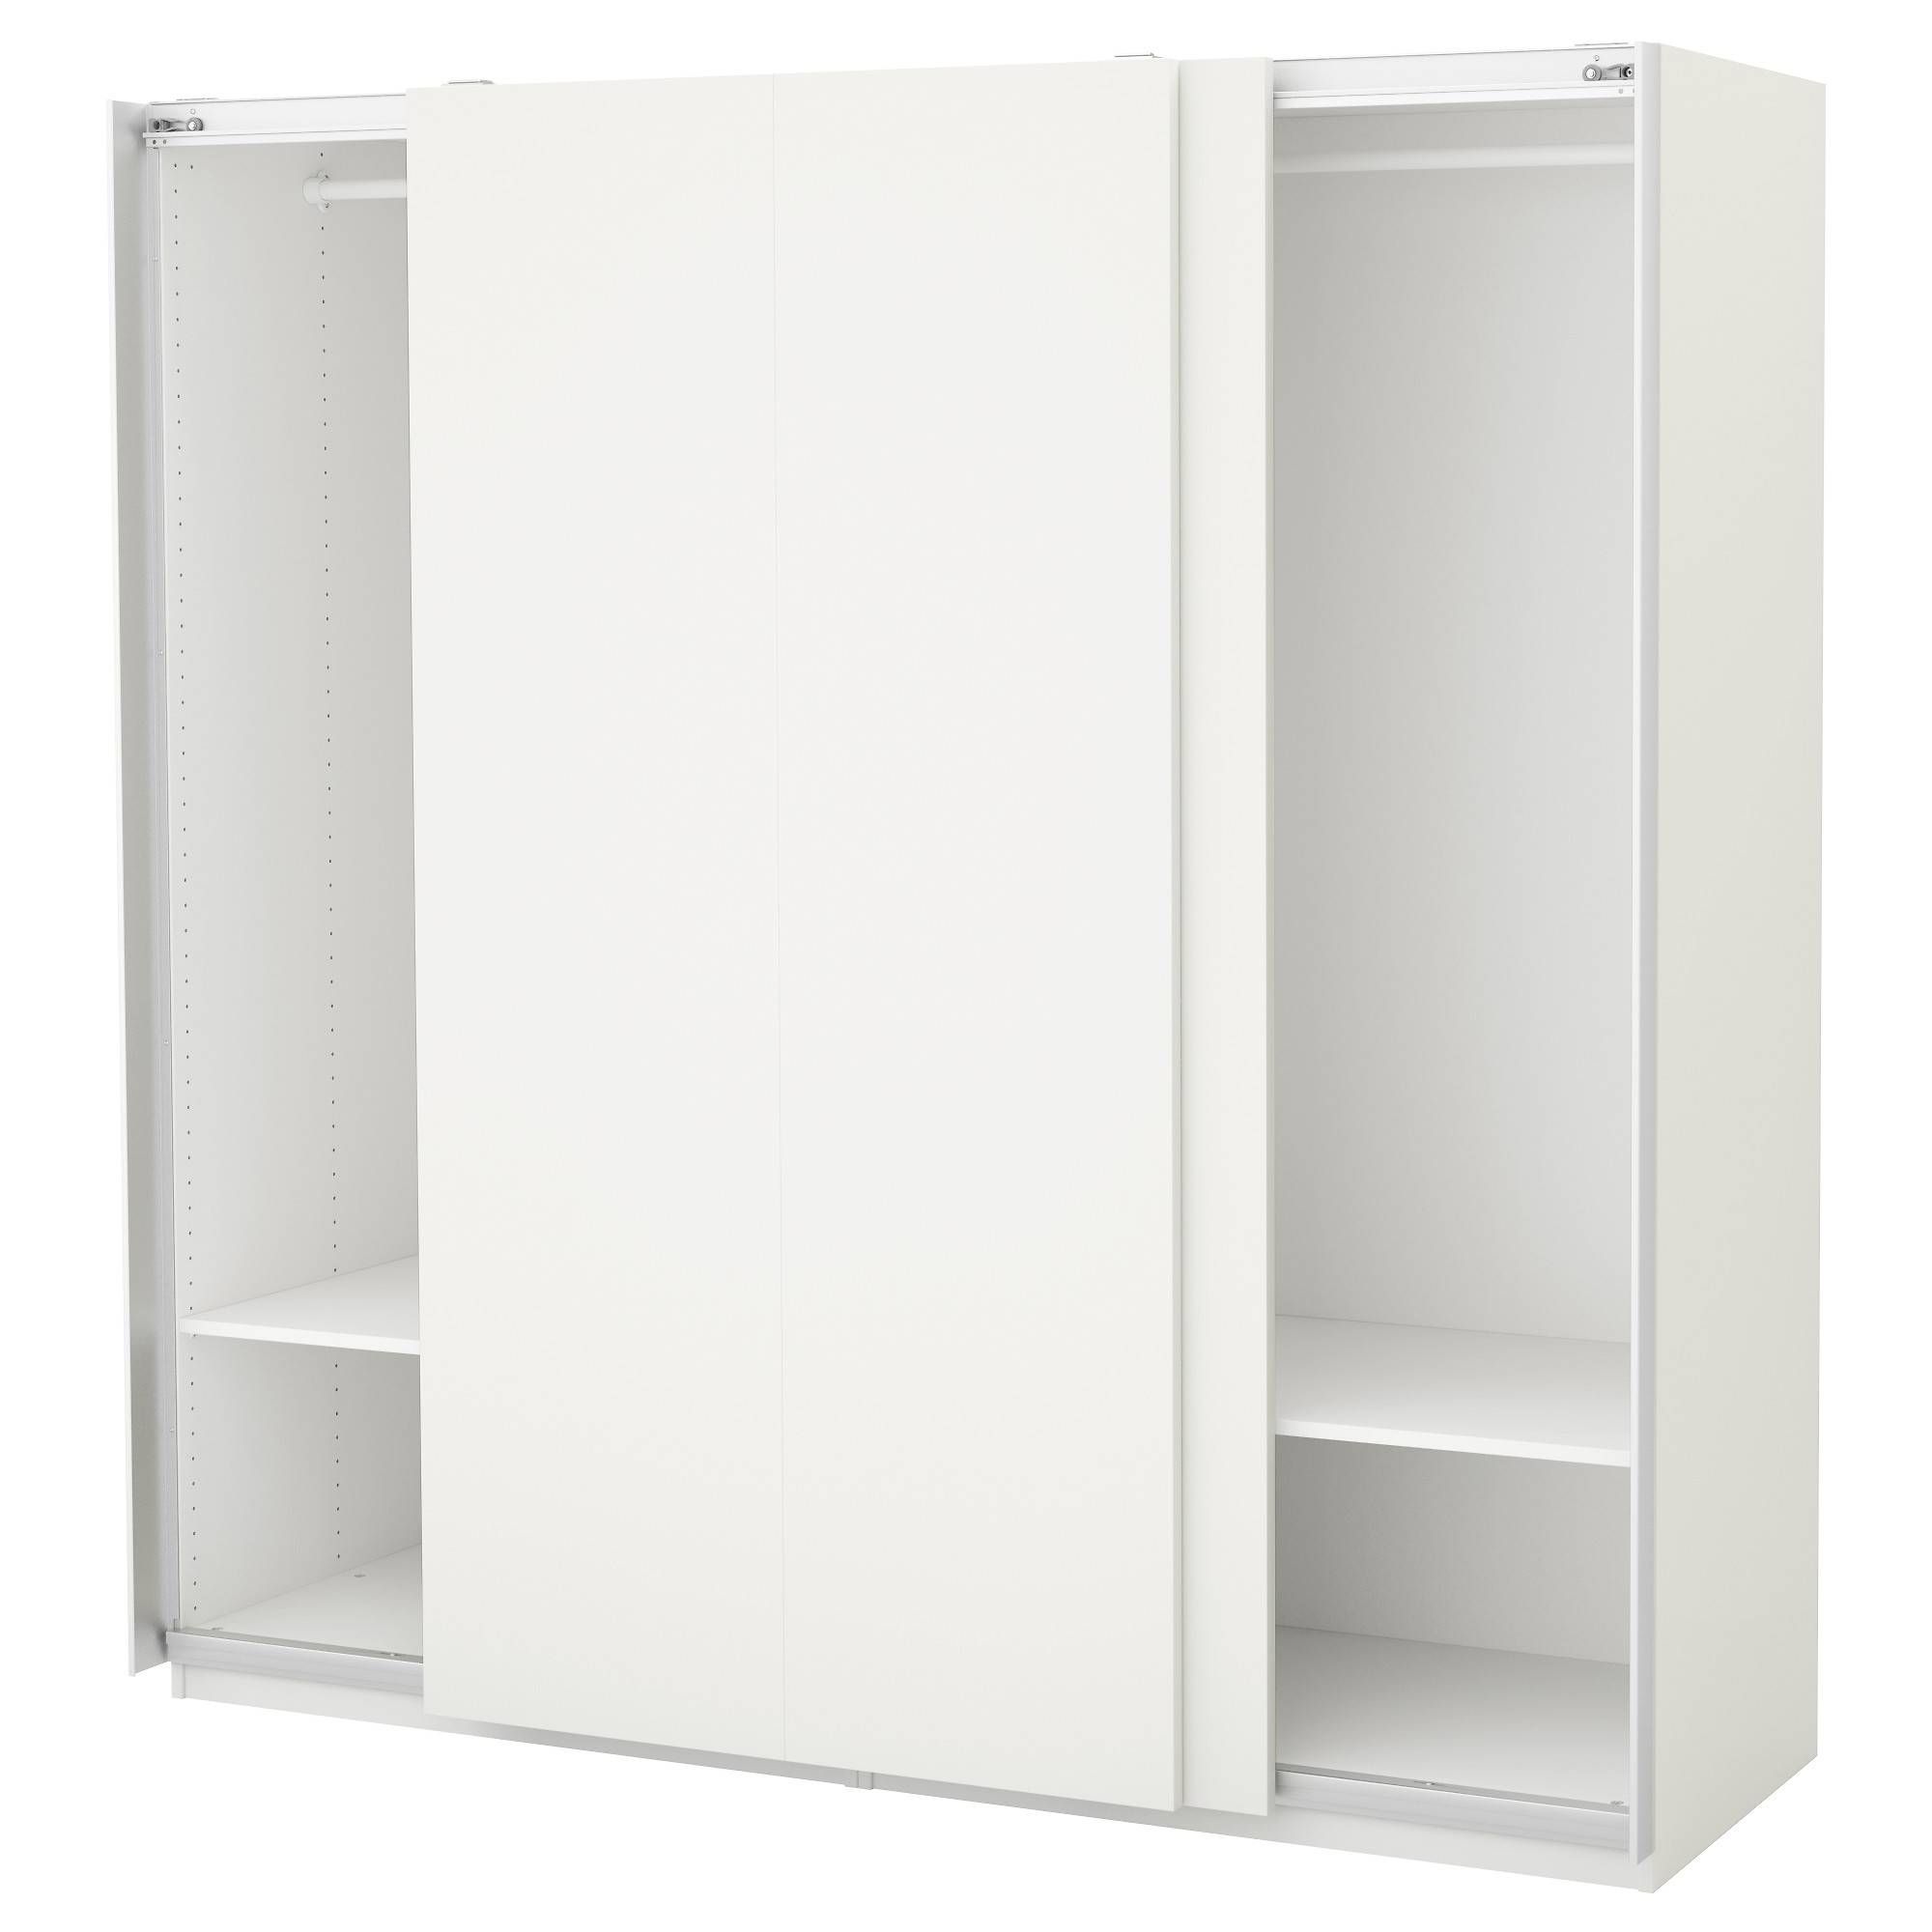 Wardrobes | Ikea In Cheap White Wardrobes (View 13 of 15)